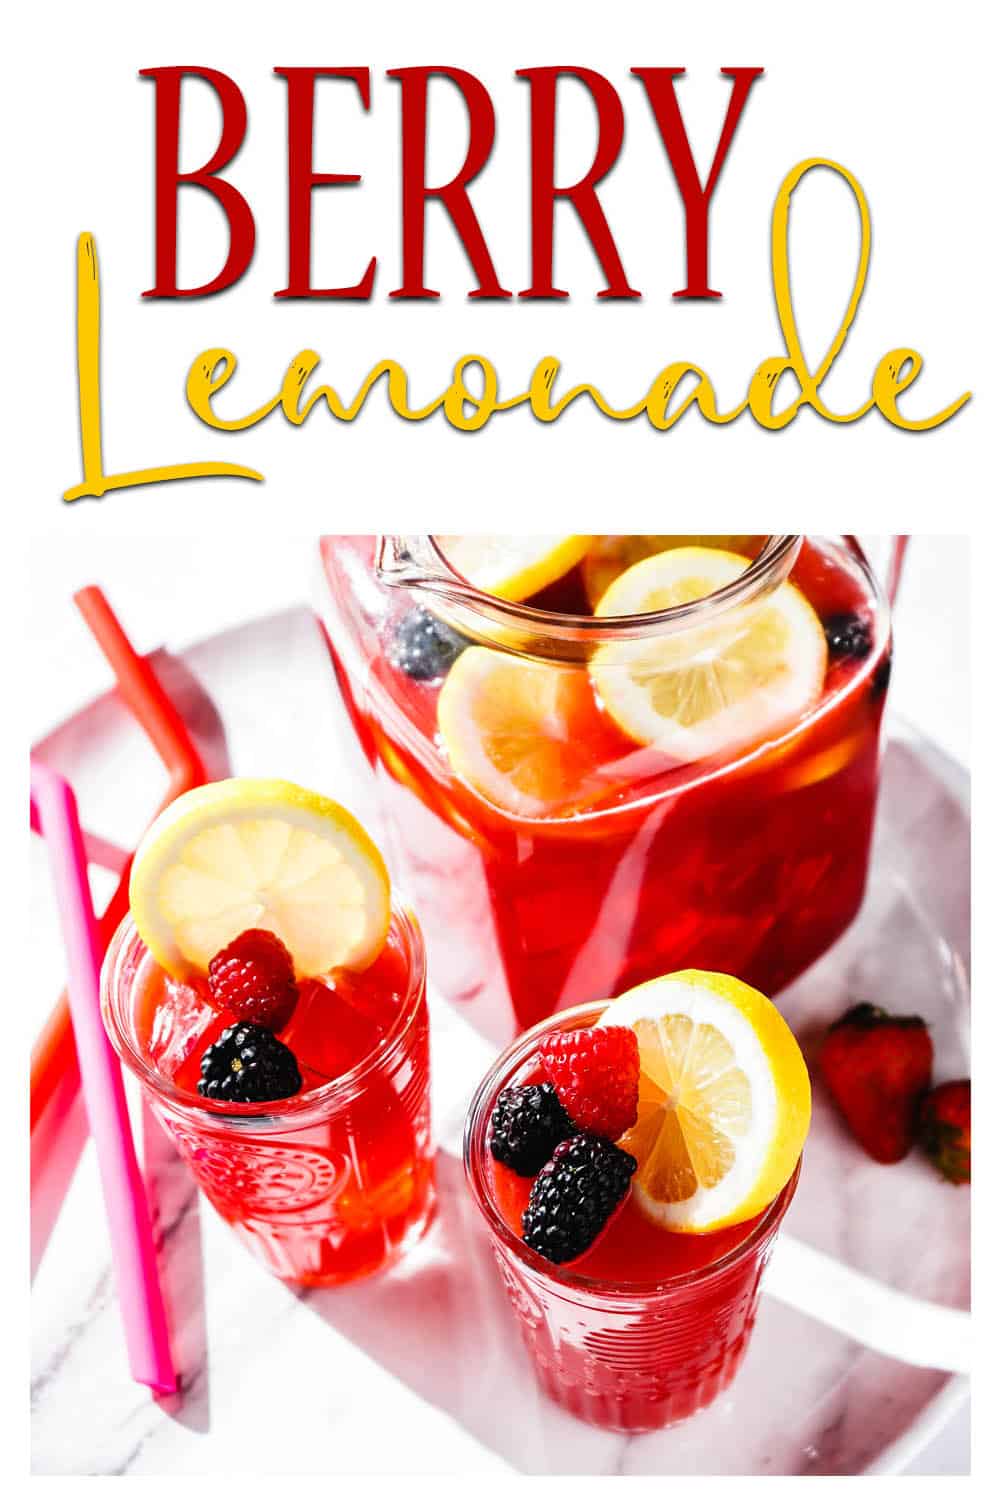 Berry Lemonade in Pitcher and Glasses with Straws